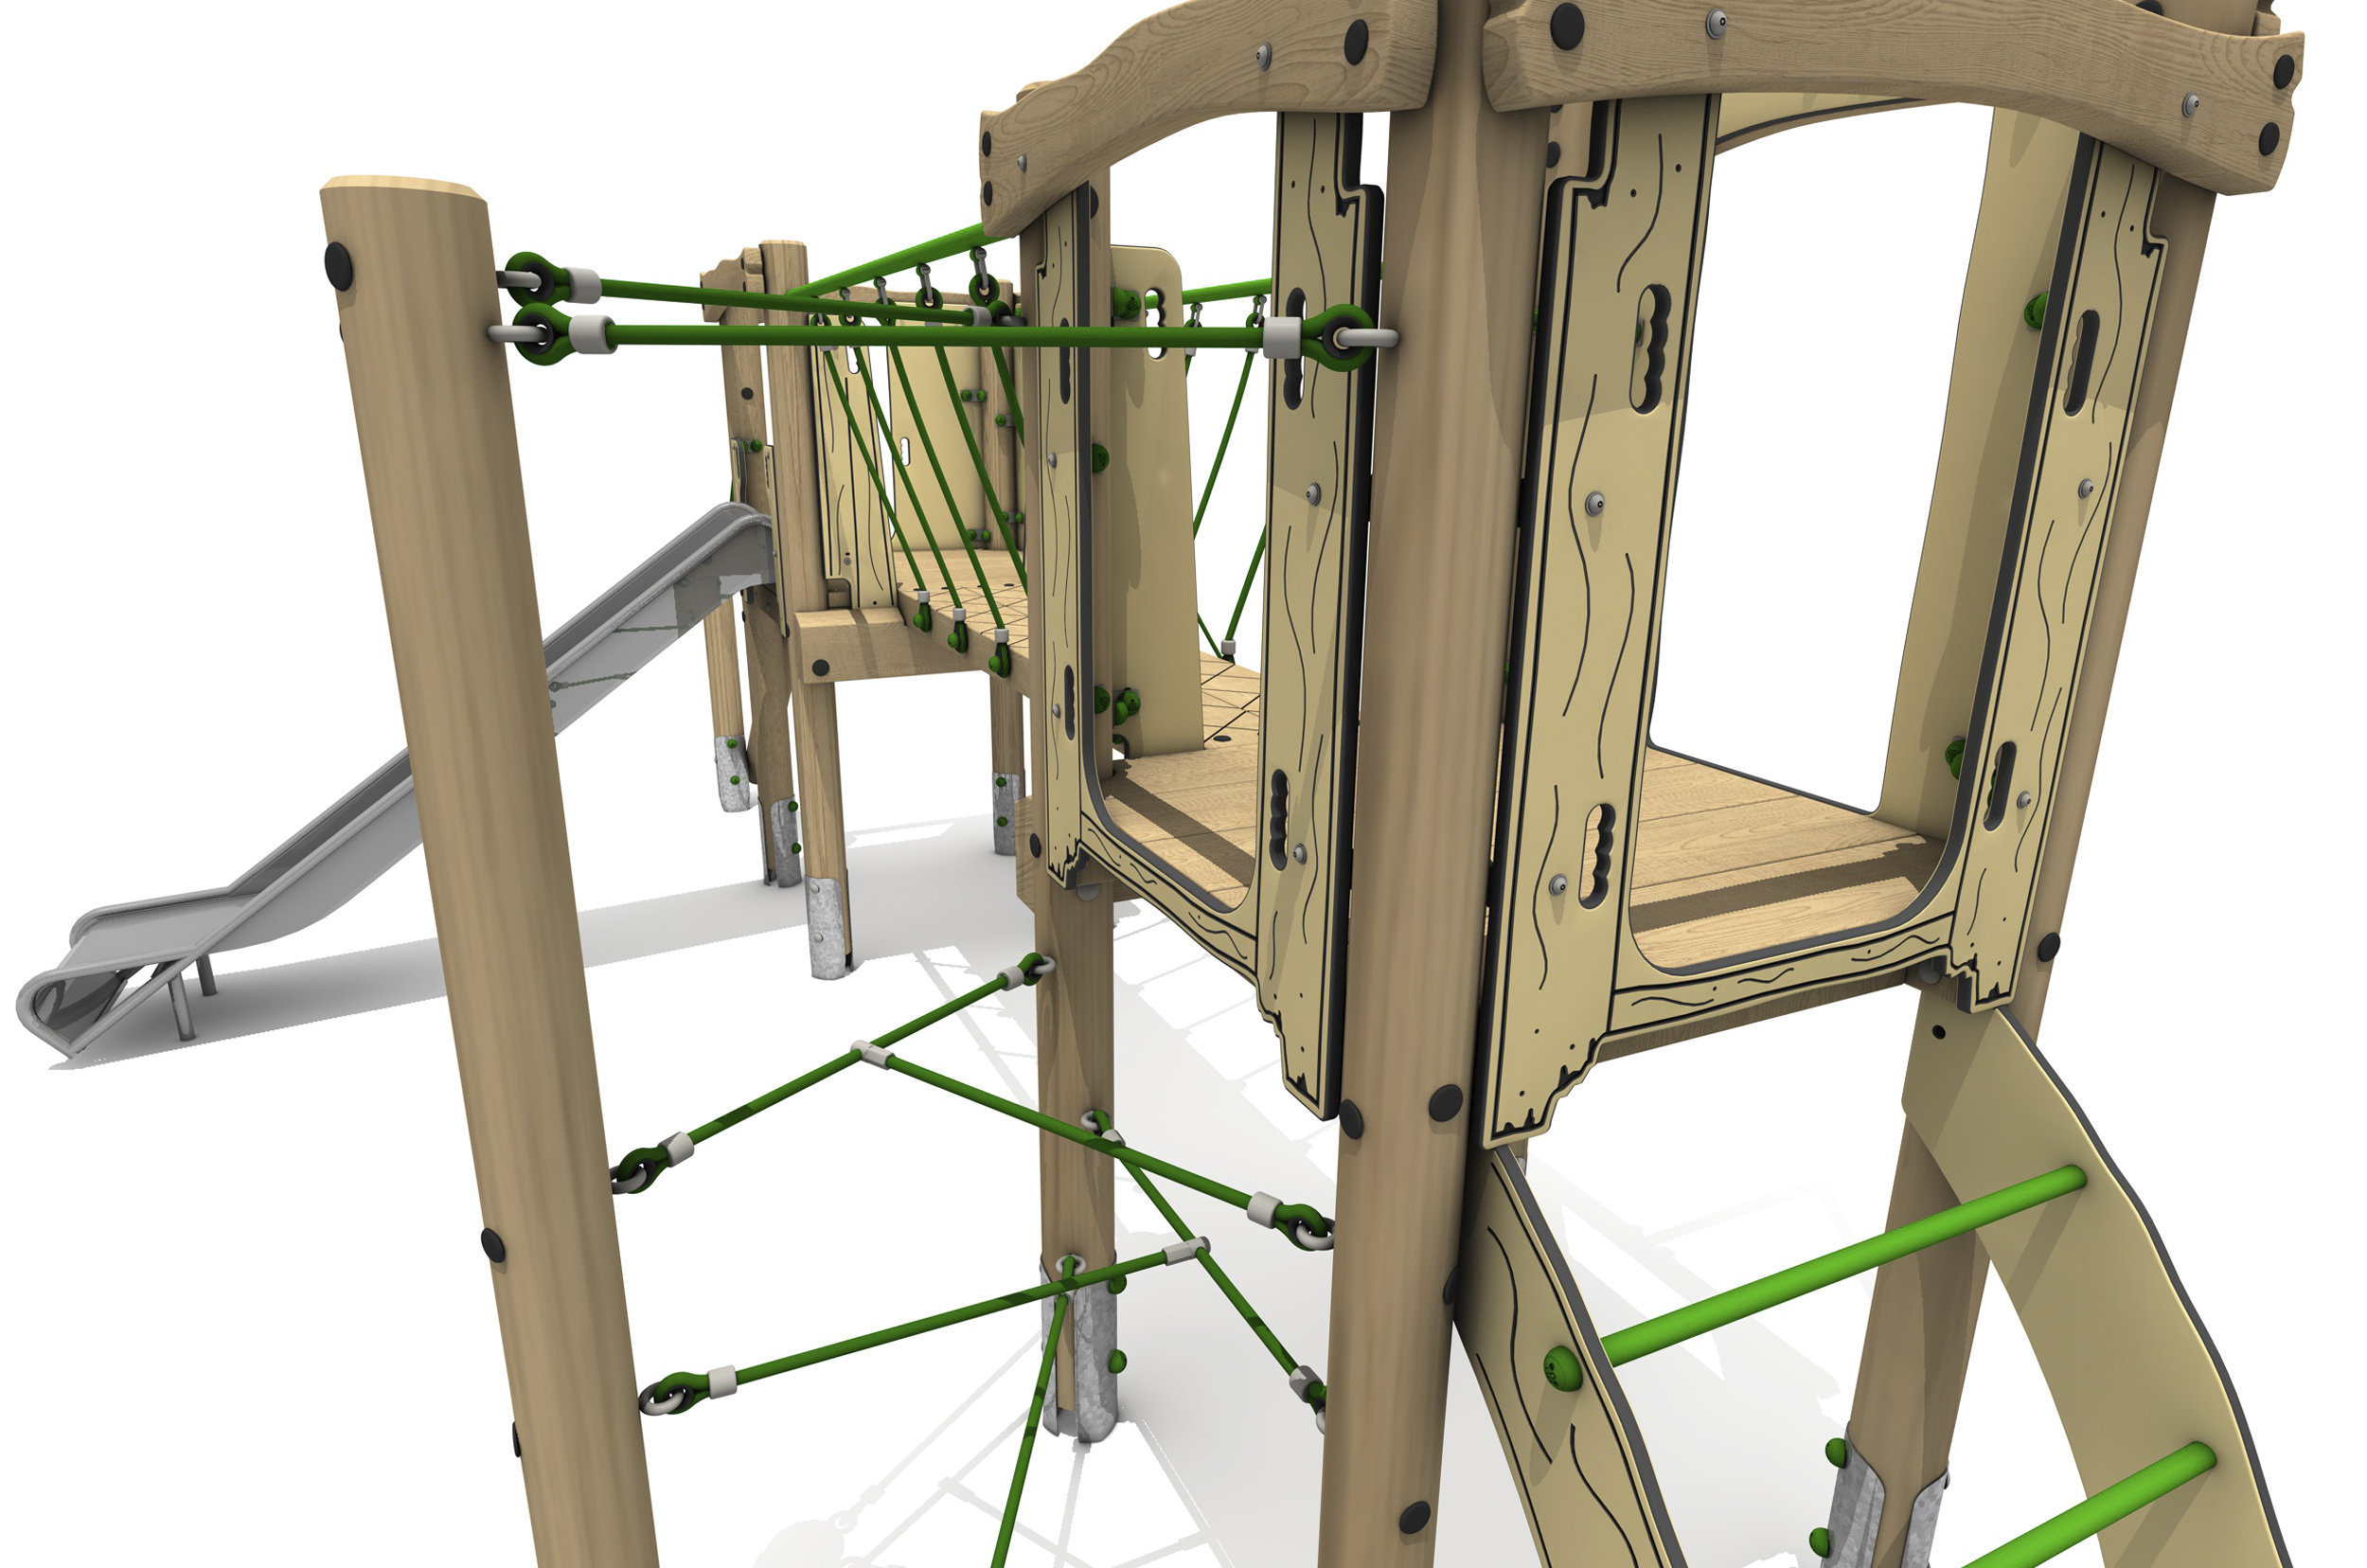 Timber Tower Double Deck 02, A timber tower climber platform accessed by a set of green T ropes on the left and an arched ladder with green rungs on the right.